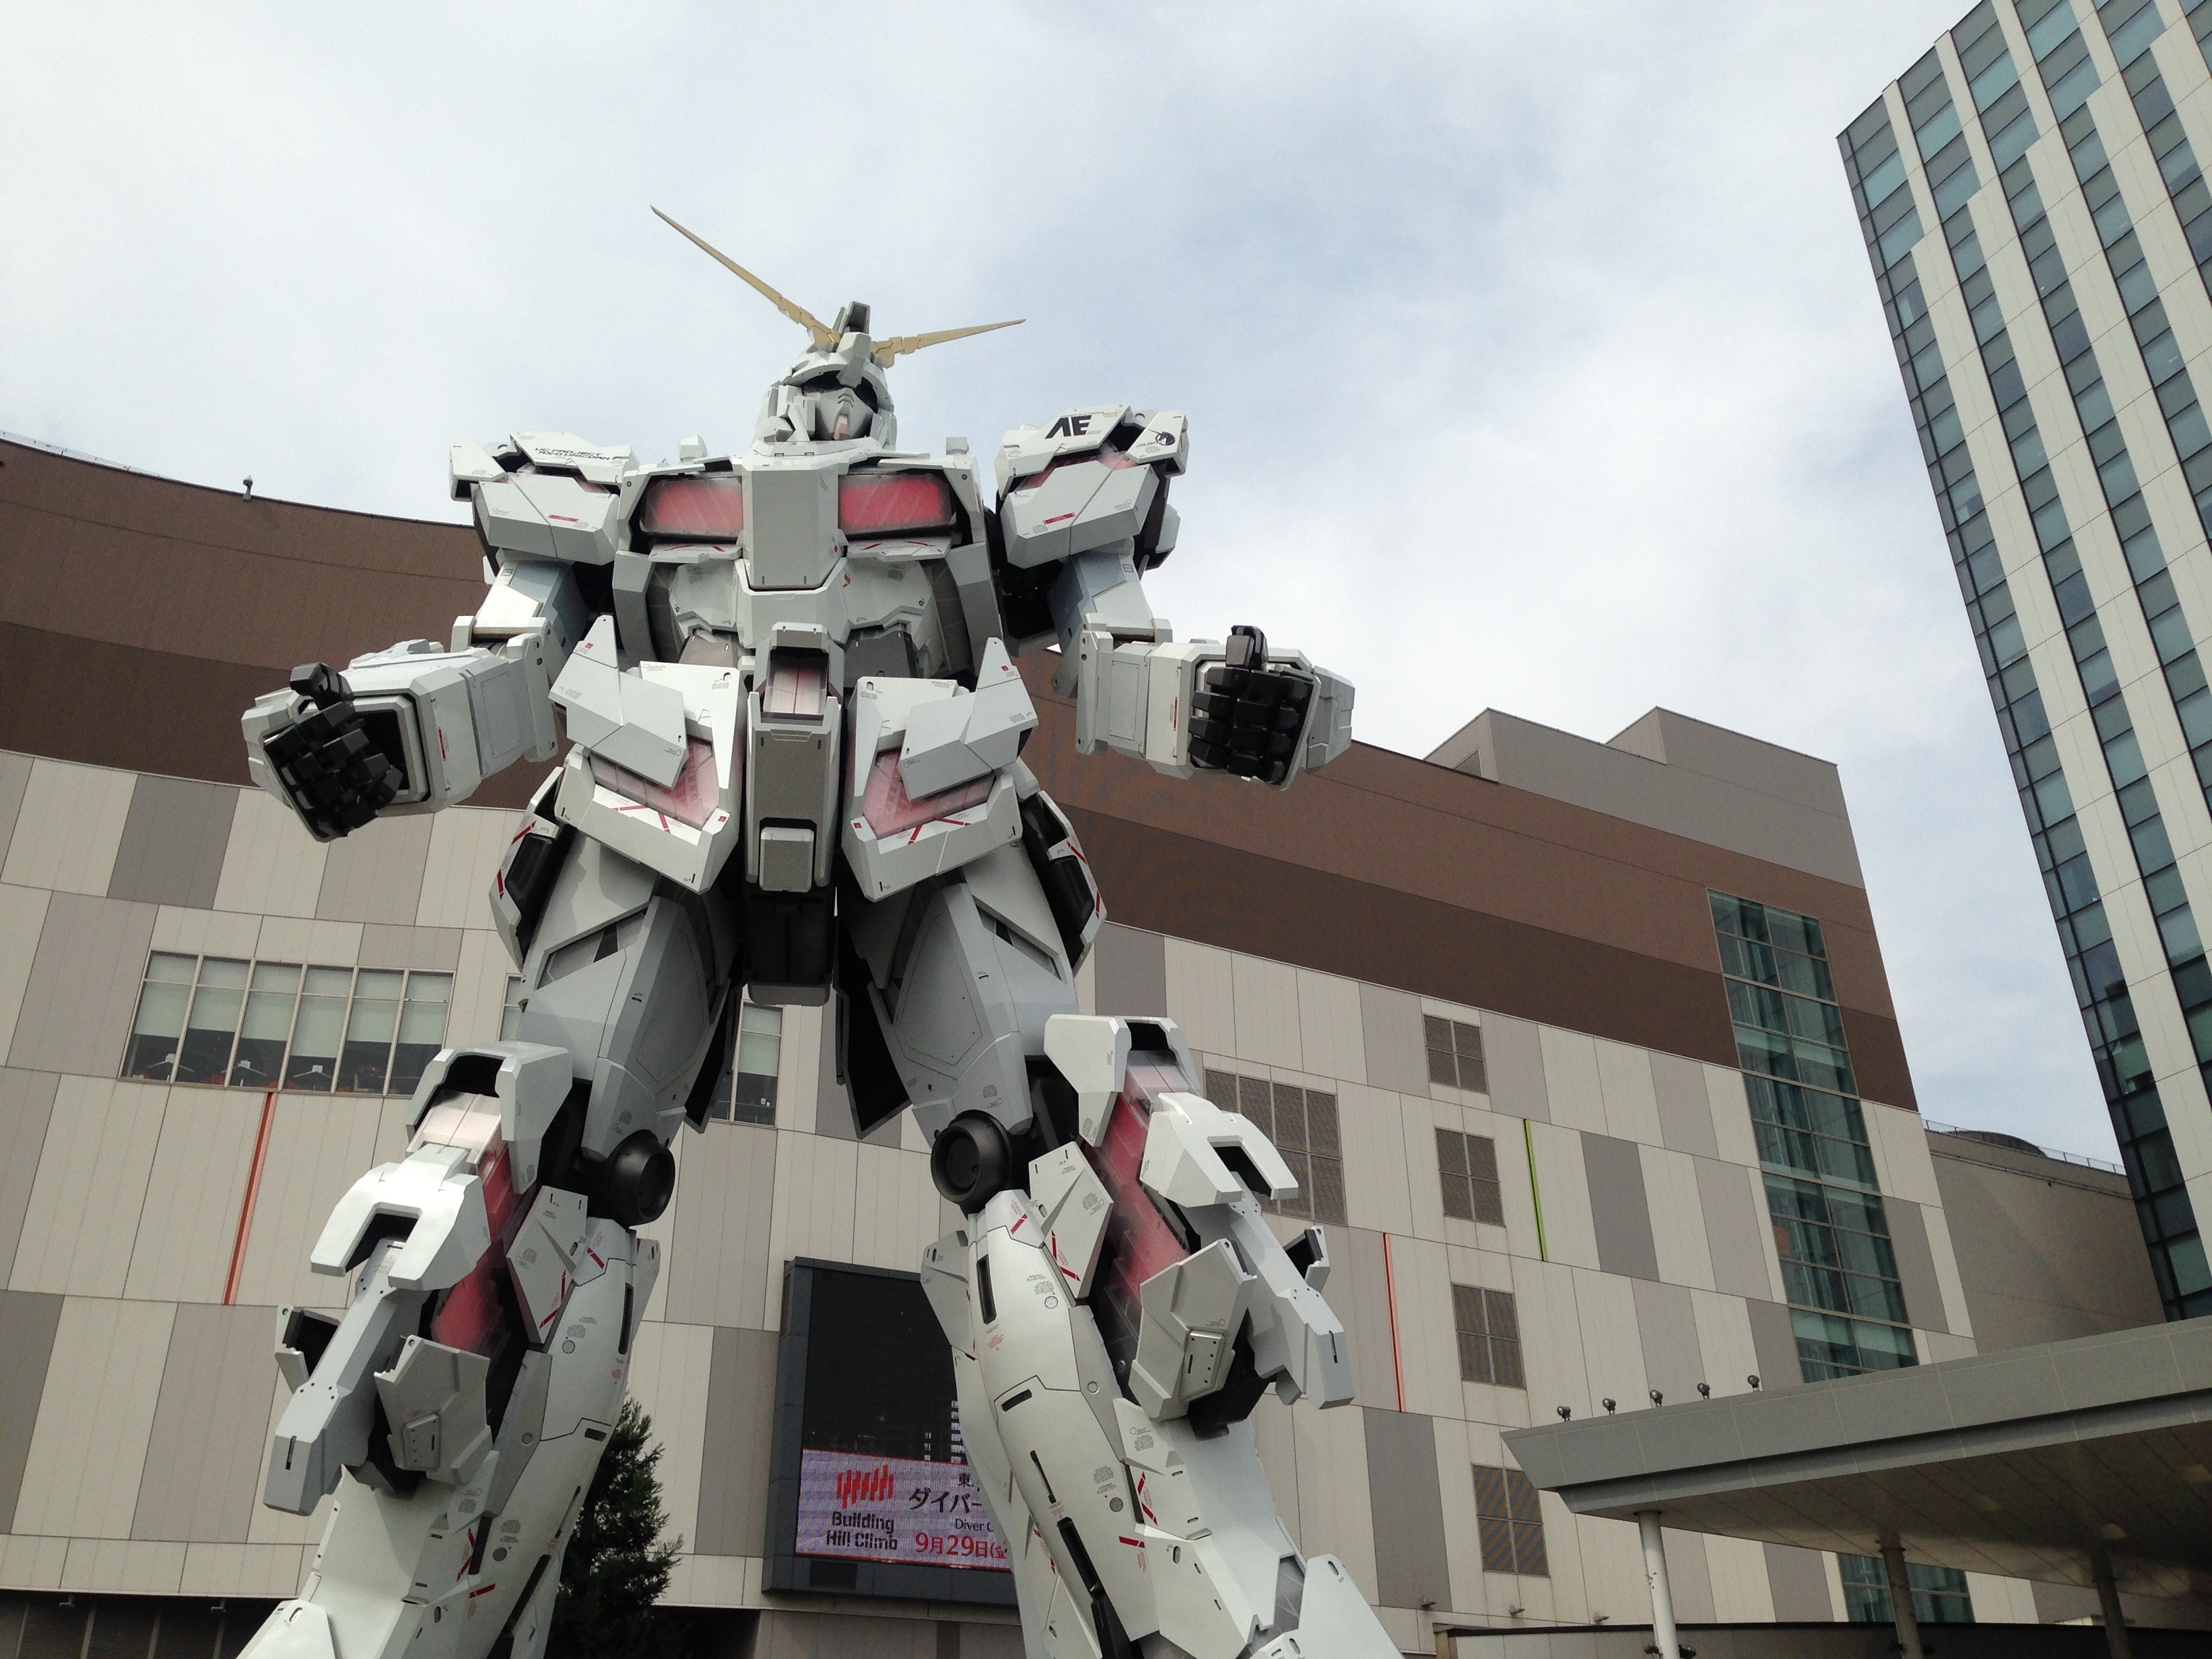 Tokyos New Giant Gundam Anime Robot Statue Is Complete And Its